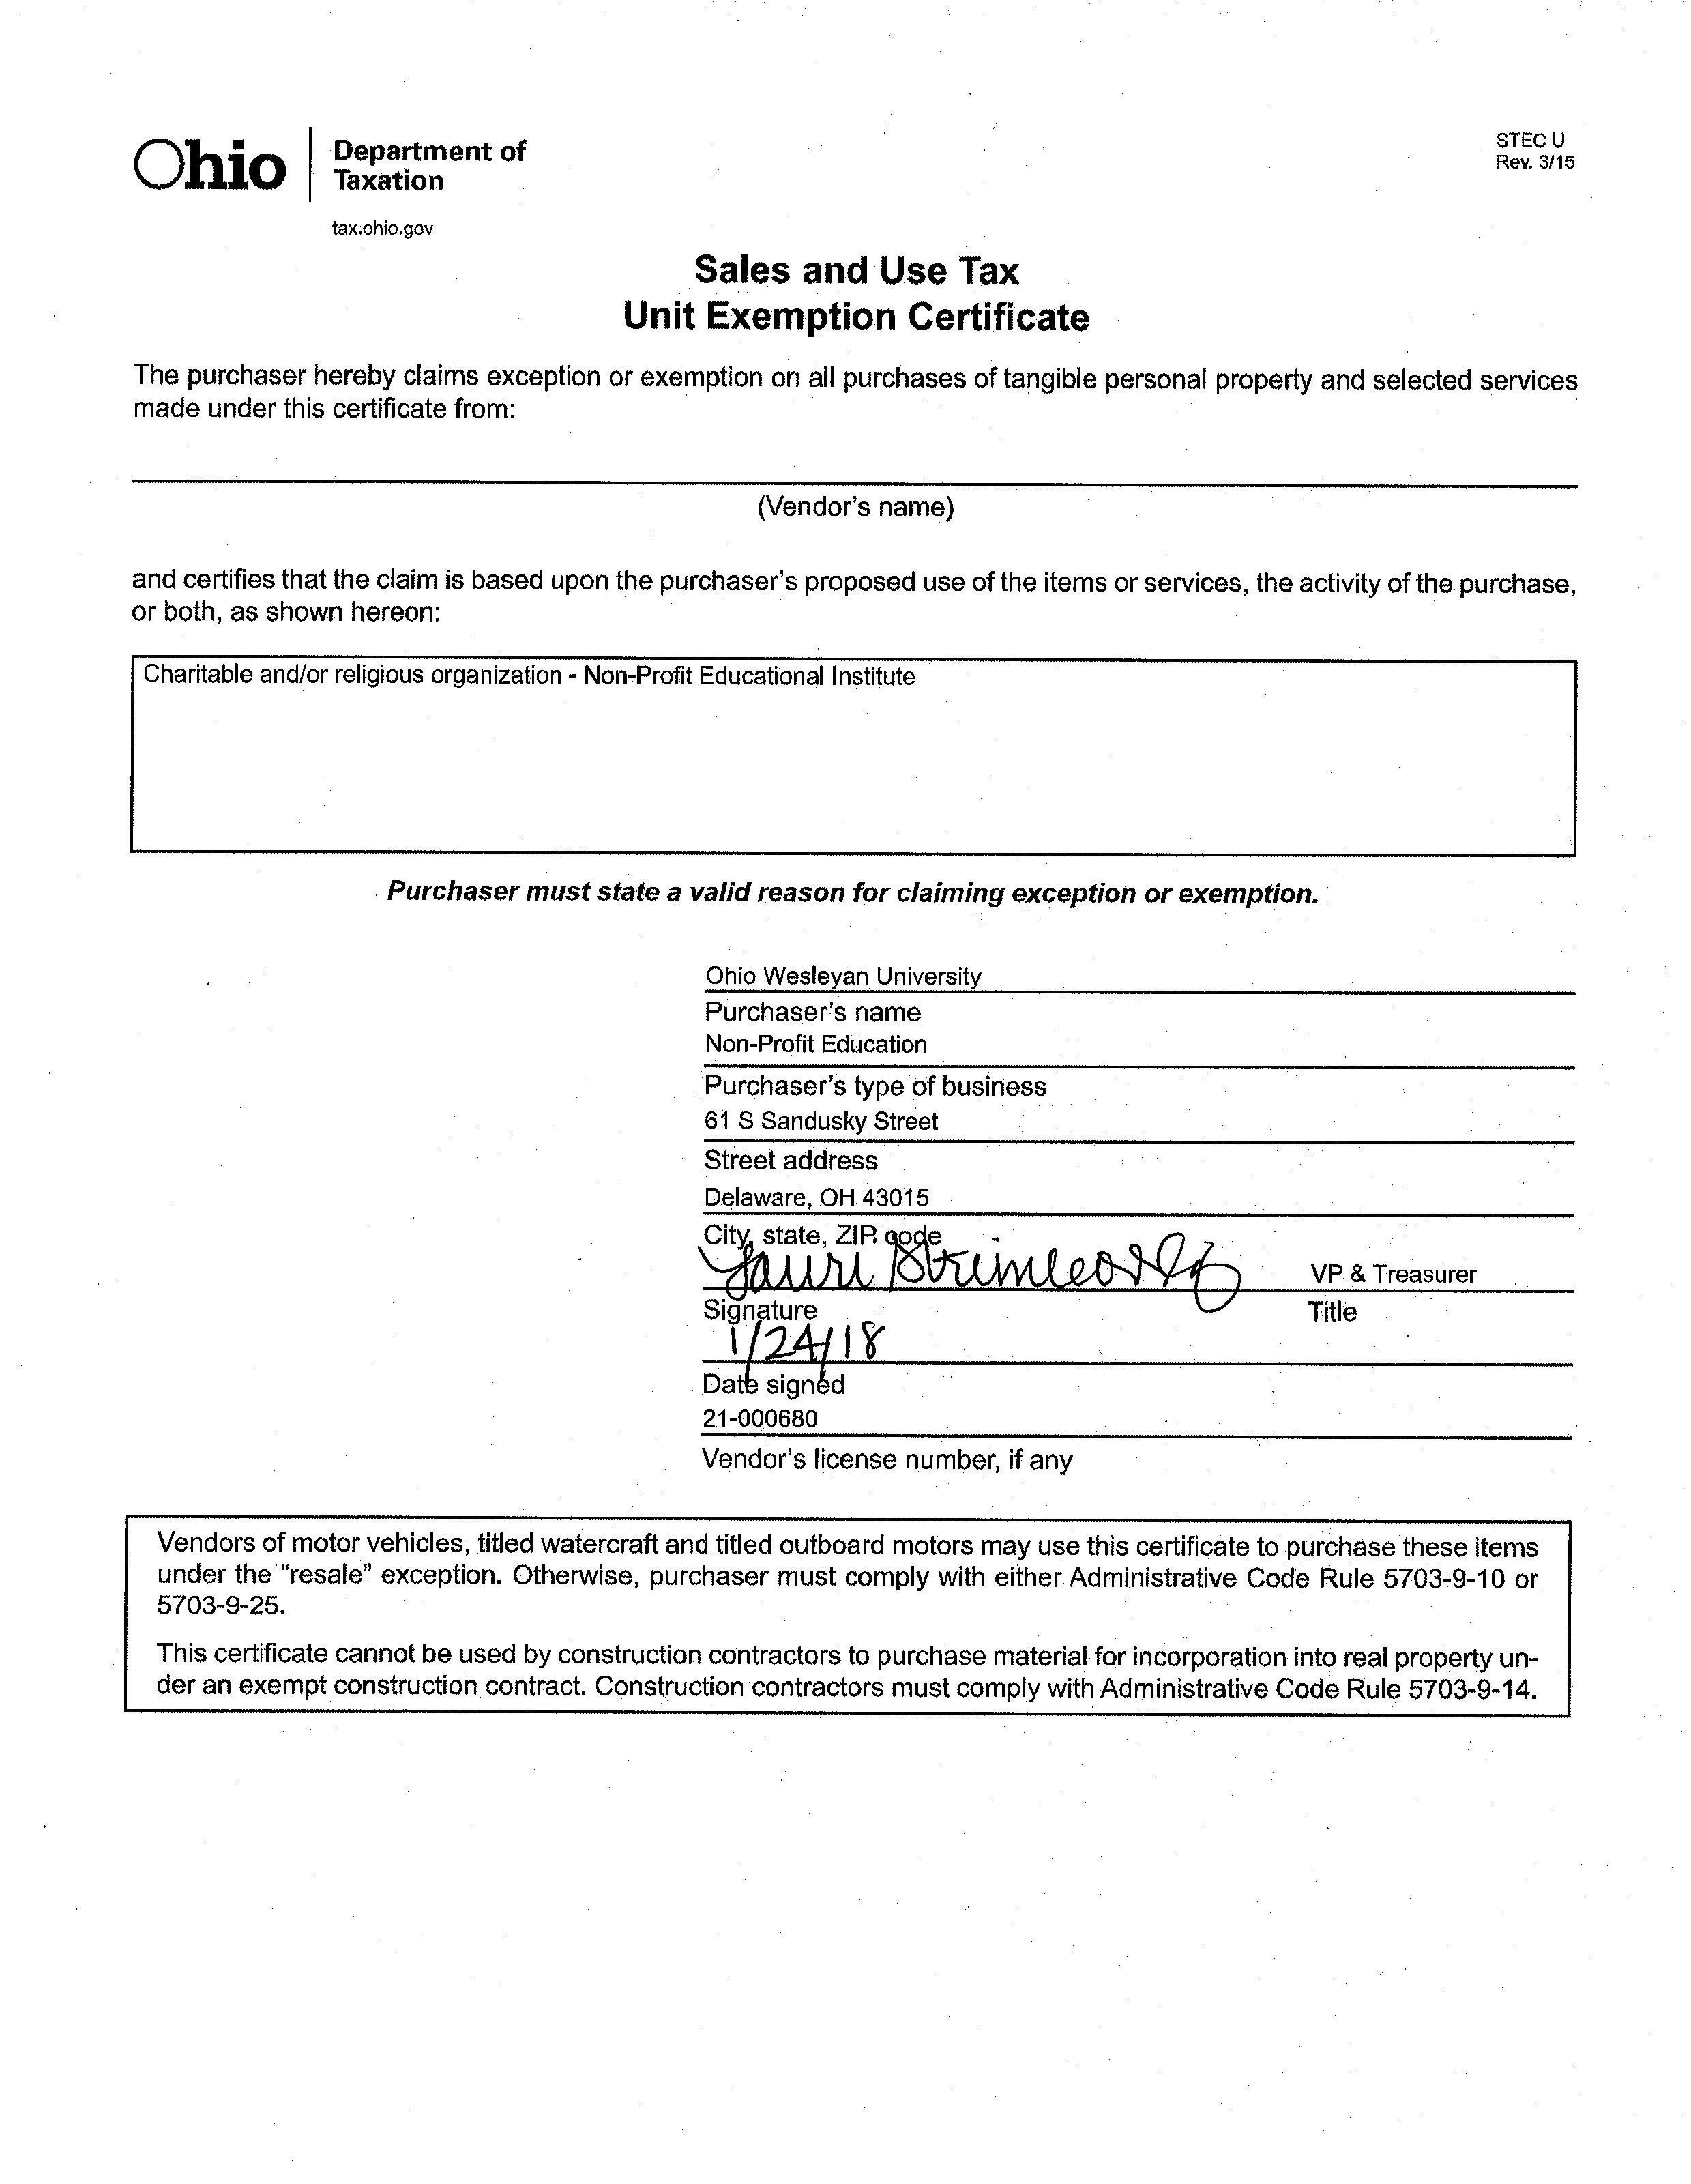 ohio-sales-and-use-tax-blanket-exemption-certificate-instructions